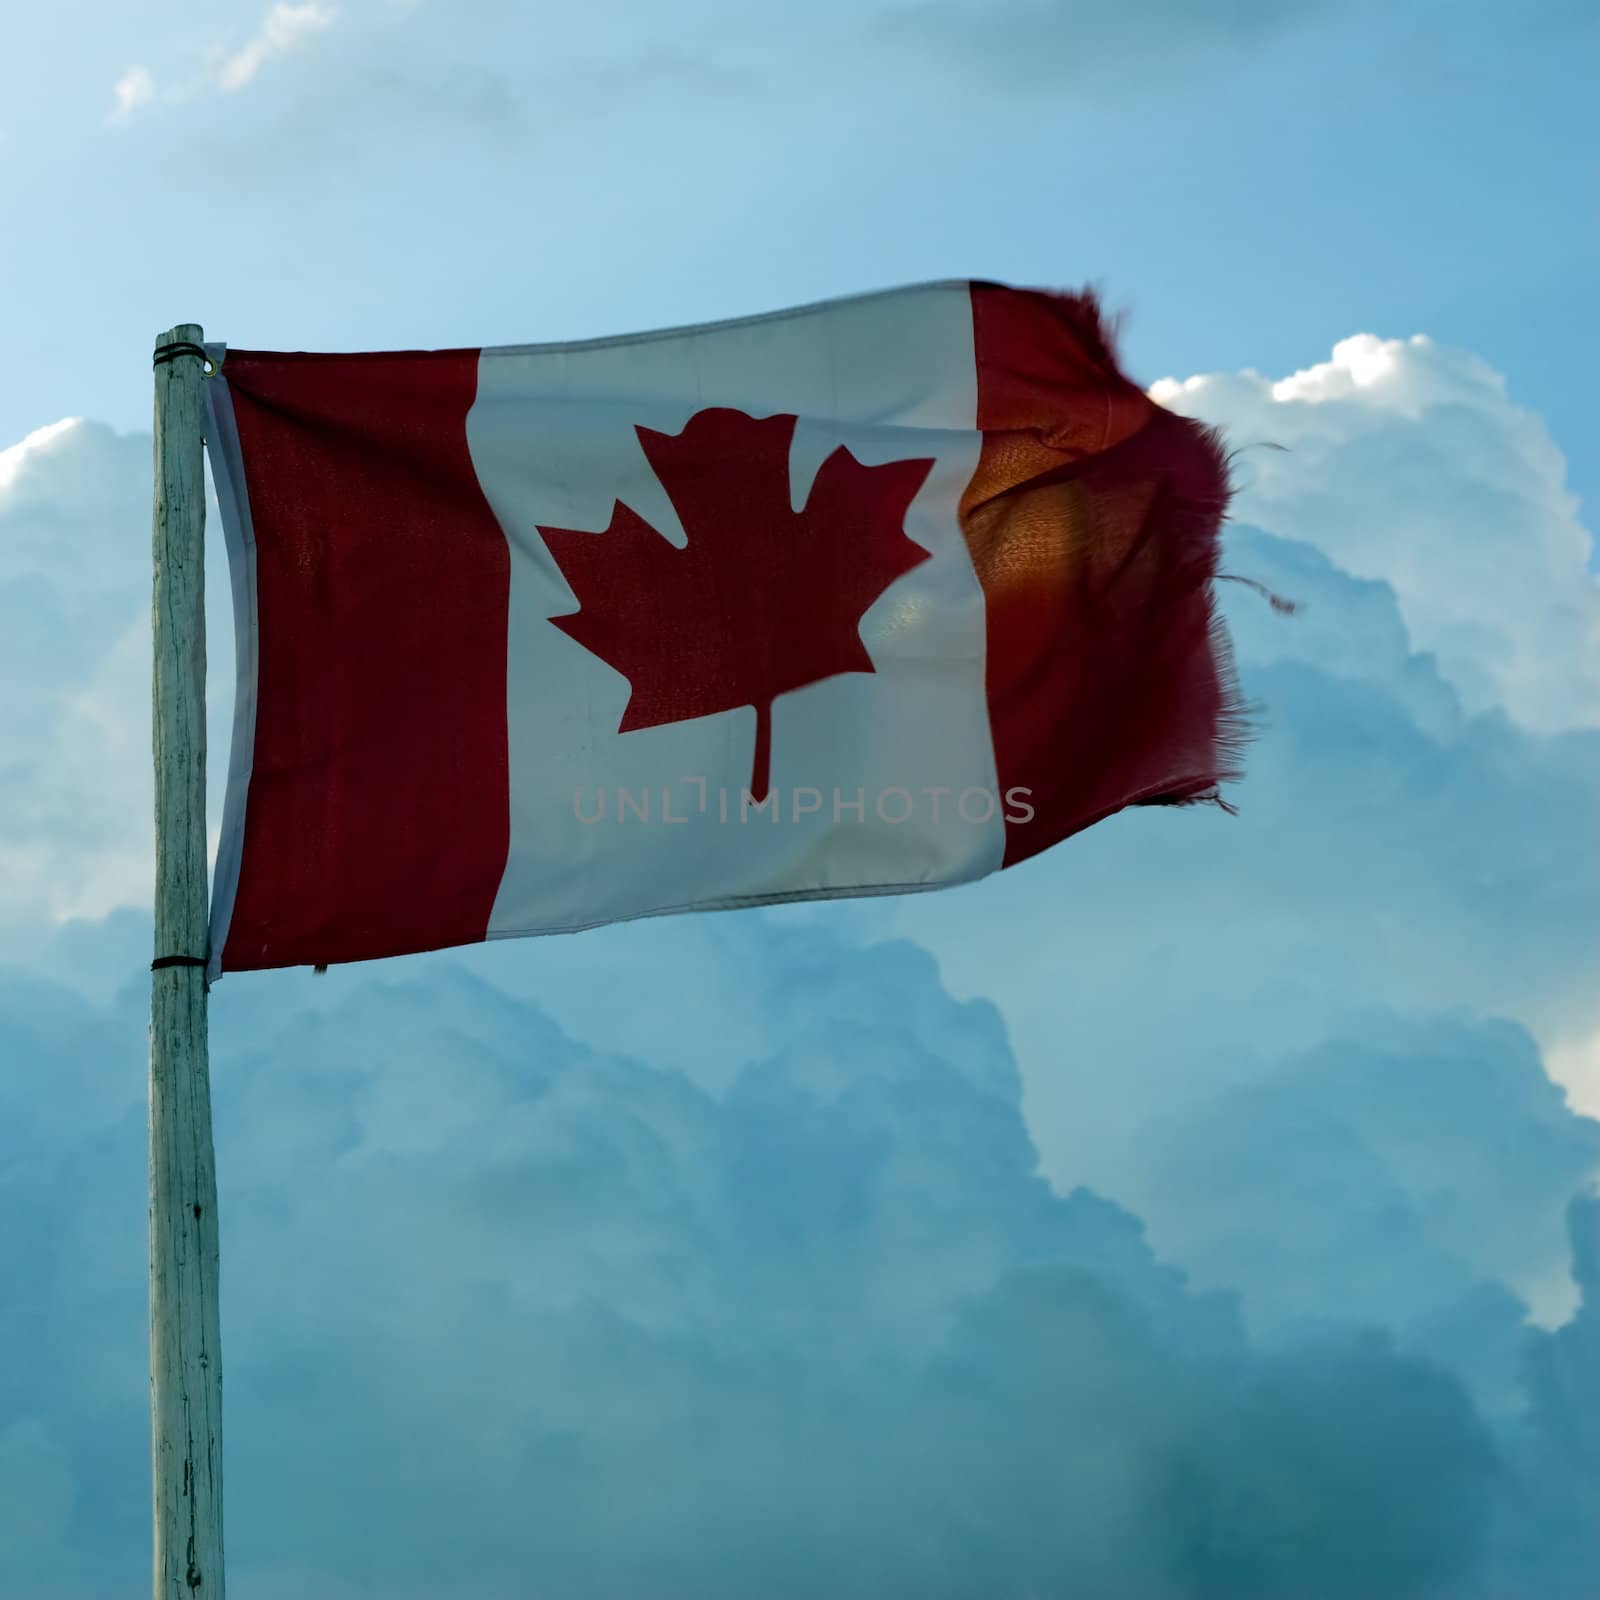 A traditional Canadian flag blowing in the wind, shot against some clouds